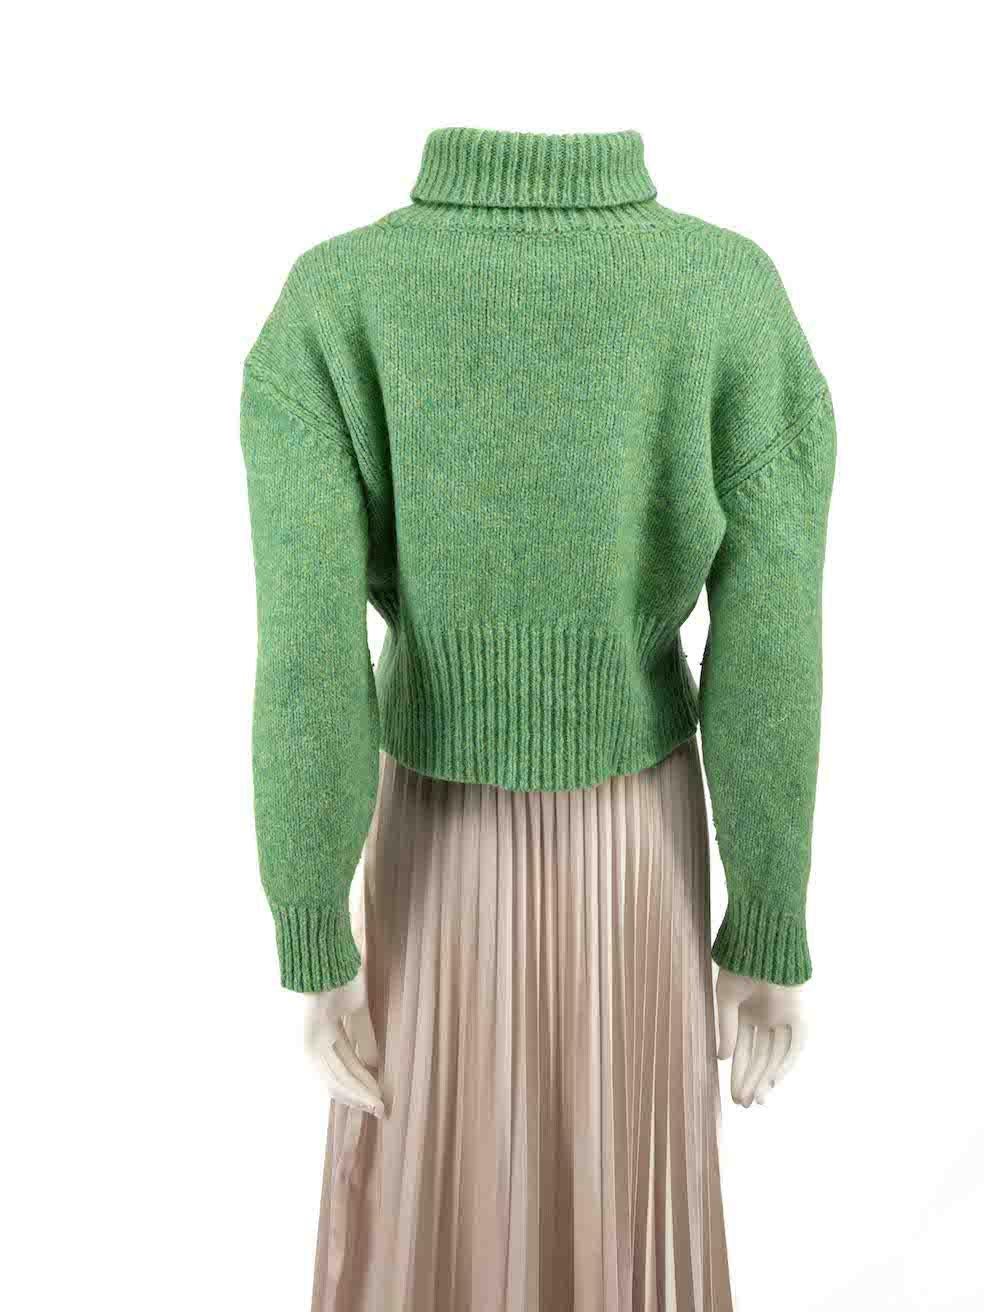 Paloma Wool Green Turtleneck Knit Sweater Size L In Good Condition For Sale In London, GB